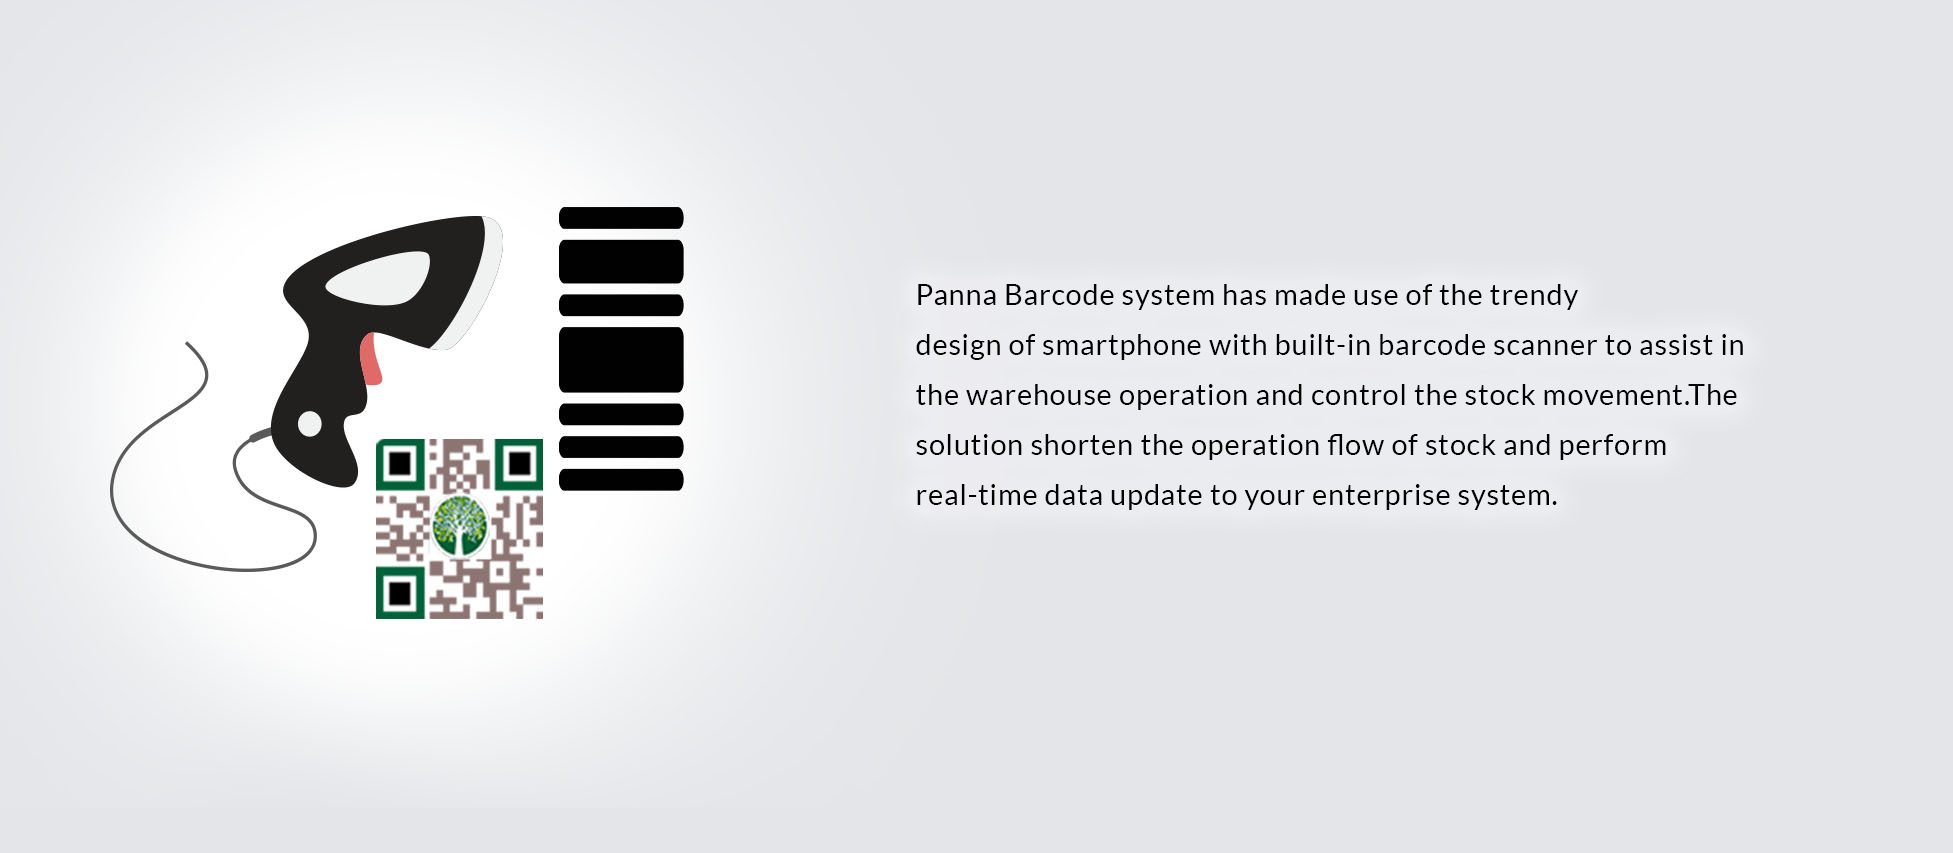 Panna Barcode system has made use of the trendy 
design of smartphone with built-in barcode scanner to assist in the warehouse operation and control the stock movement.The solution shorten the operation flow of stock and perform real-time data update to your enterprise system.